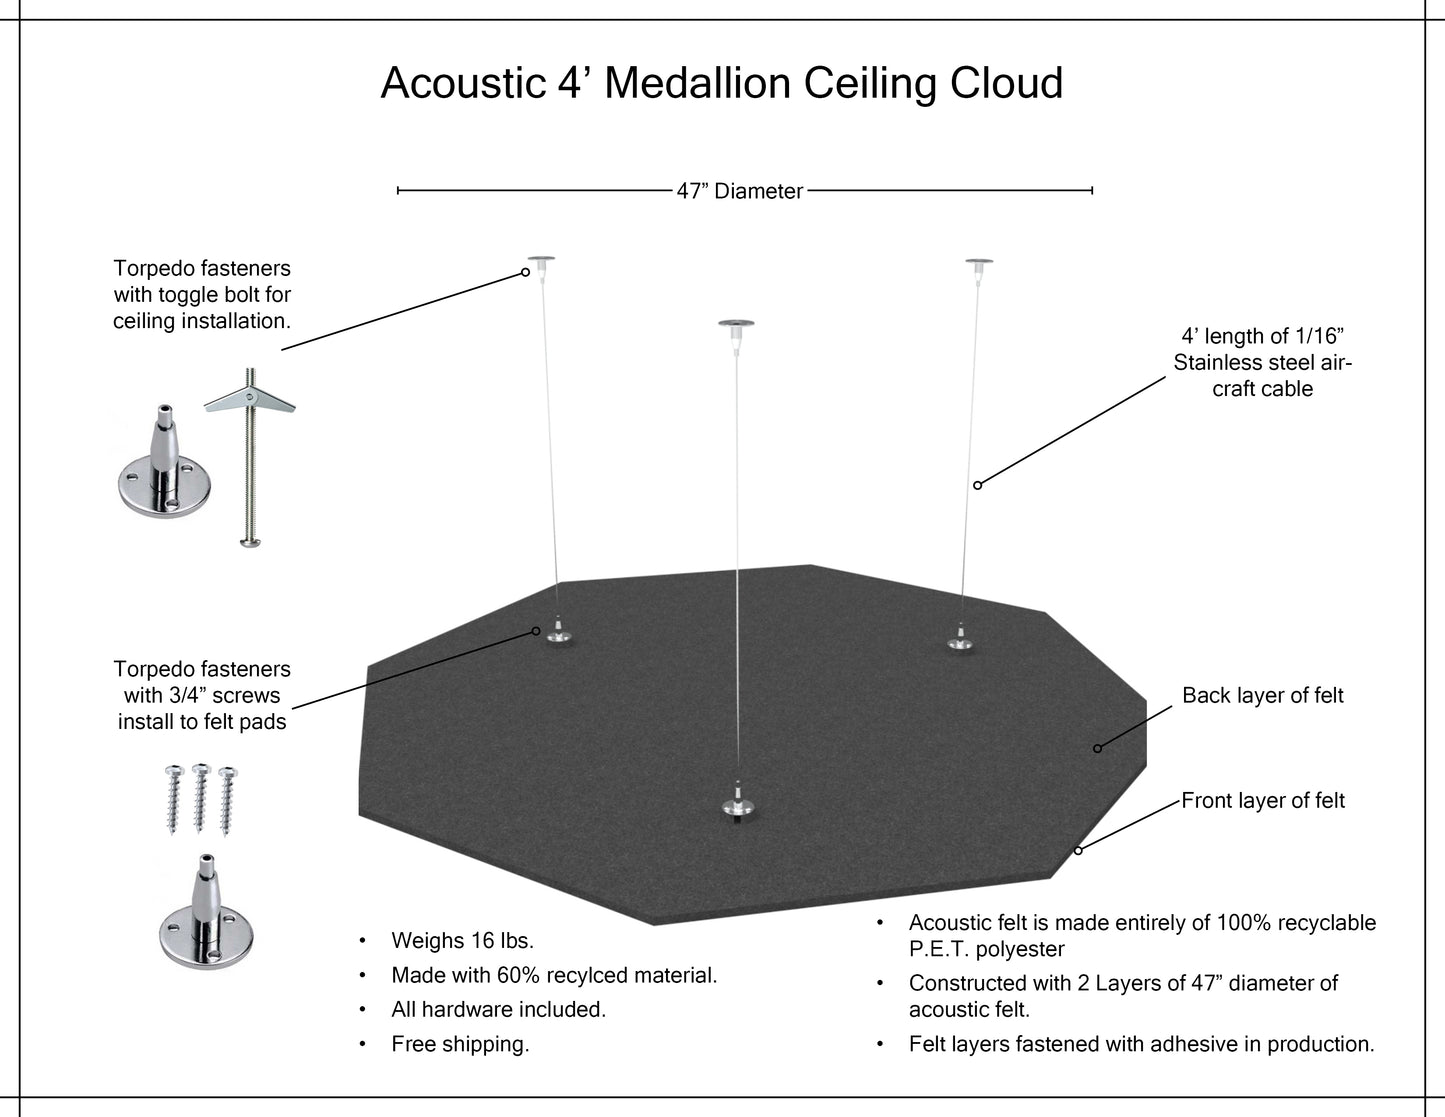 Medallion Acoustic Ceiling Cloud - Light Years